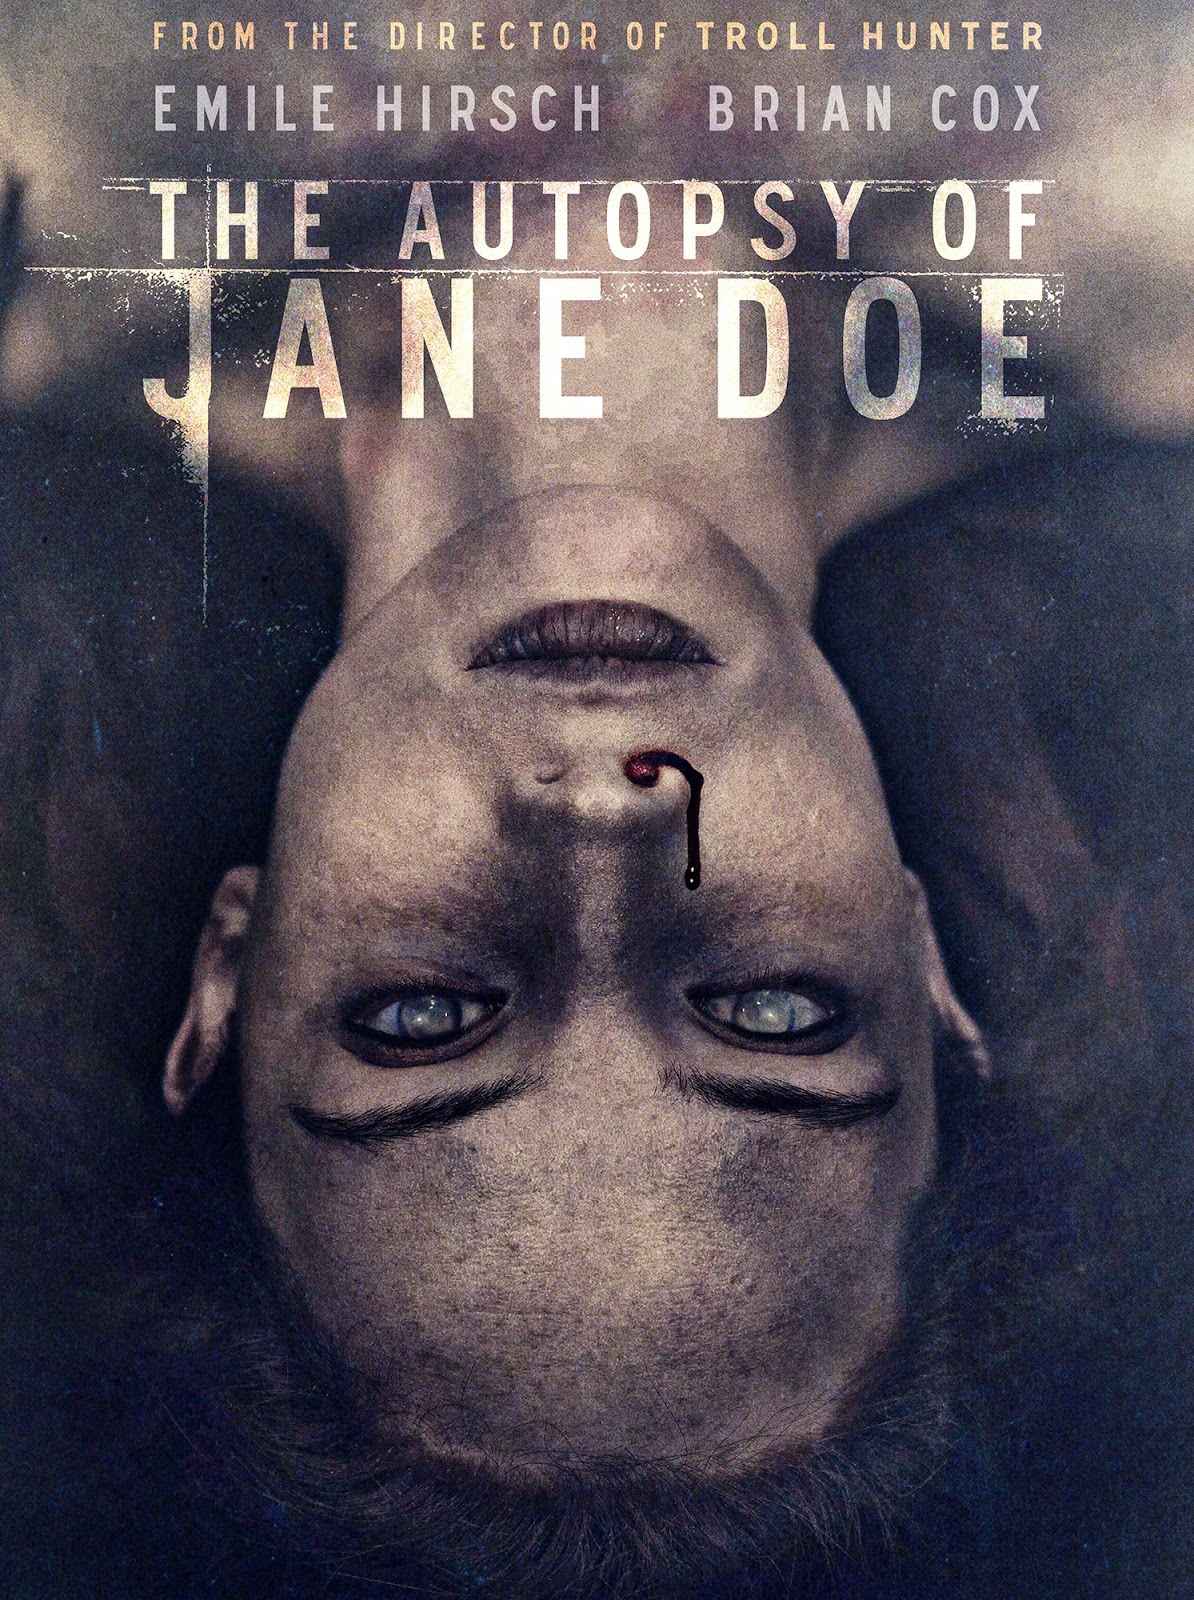 [RECENSIONE] Autopsy (The Autopsy of Jane Doe)